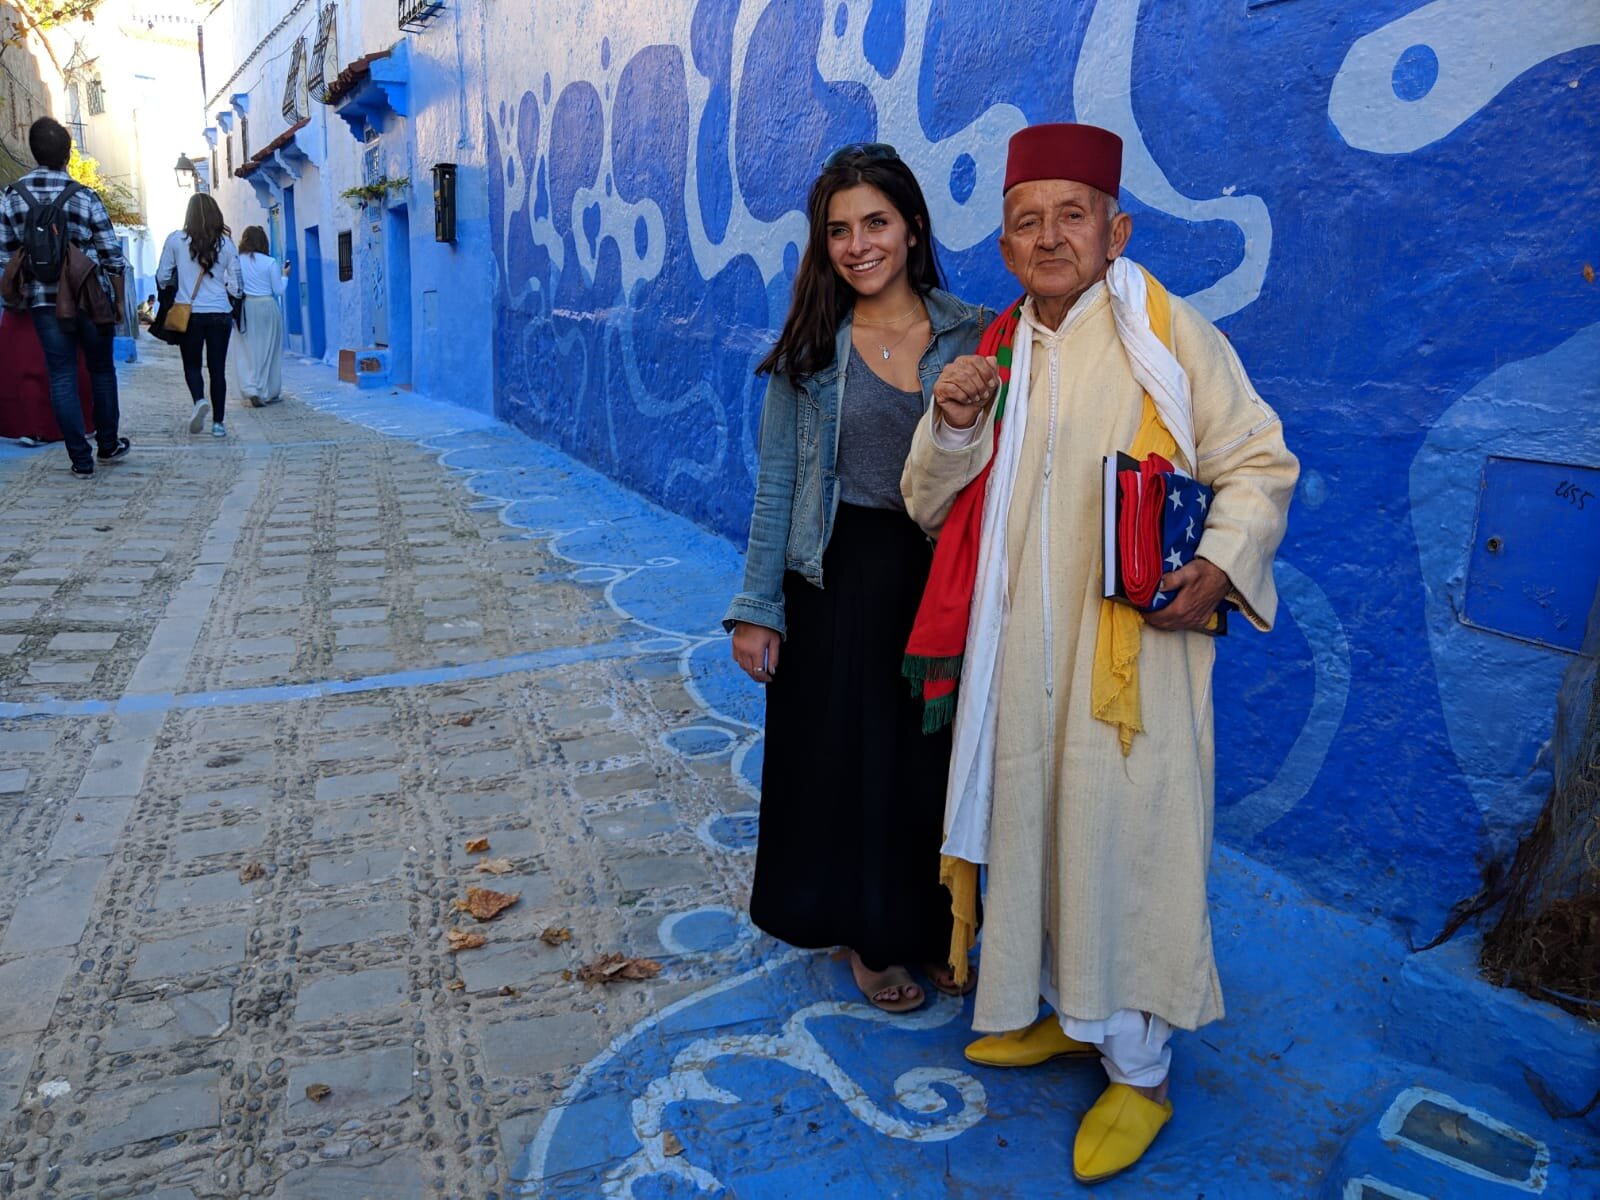 Early Afternoon: Chefchaouen, Morocco - When we arrived in Chefchaouen we were immediately greeted by a little local man who would be our tour guide.  He is one of the funniest, cutest, and most charismatic people I have ever met. I feel like he could honestly be the main character of the next Disney movie. He escorted us through the city for several hours, telling us about the history, culture, and local legends. I found it very interesting that despite many theories no one truly knows why the entire city is painted blue.  The only disappointment was due to the large size of our group. With the narrow spaces, it was often difficult to hear the tour guide. Also, it was frustrating to wait for everyone to take their 1,000 pictures at EVERY stop.  